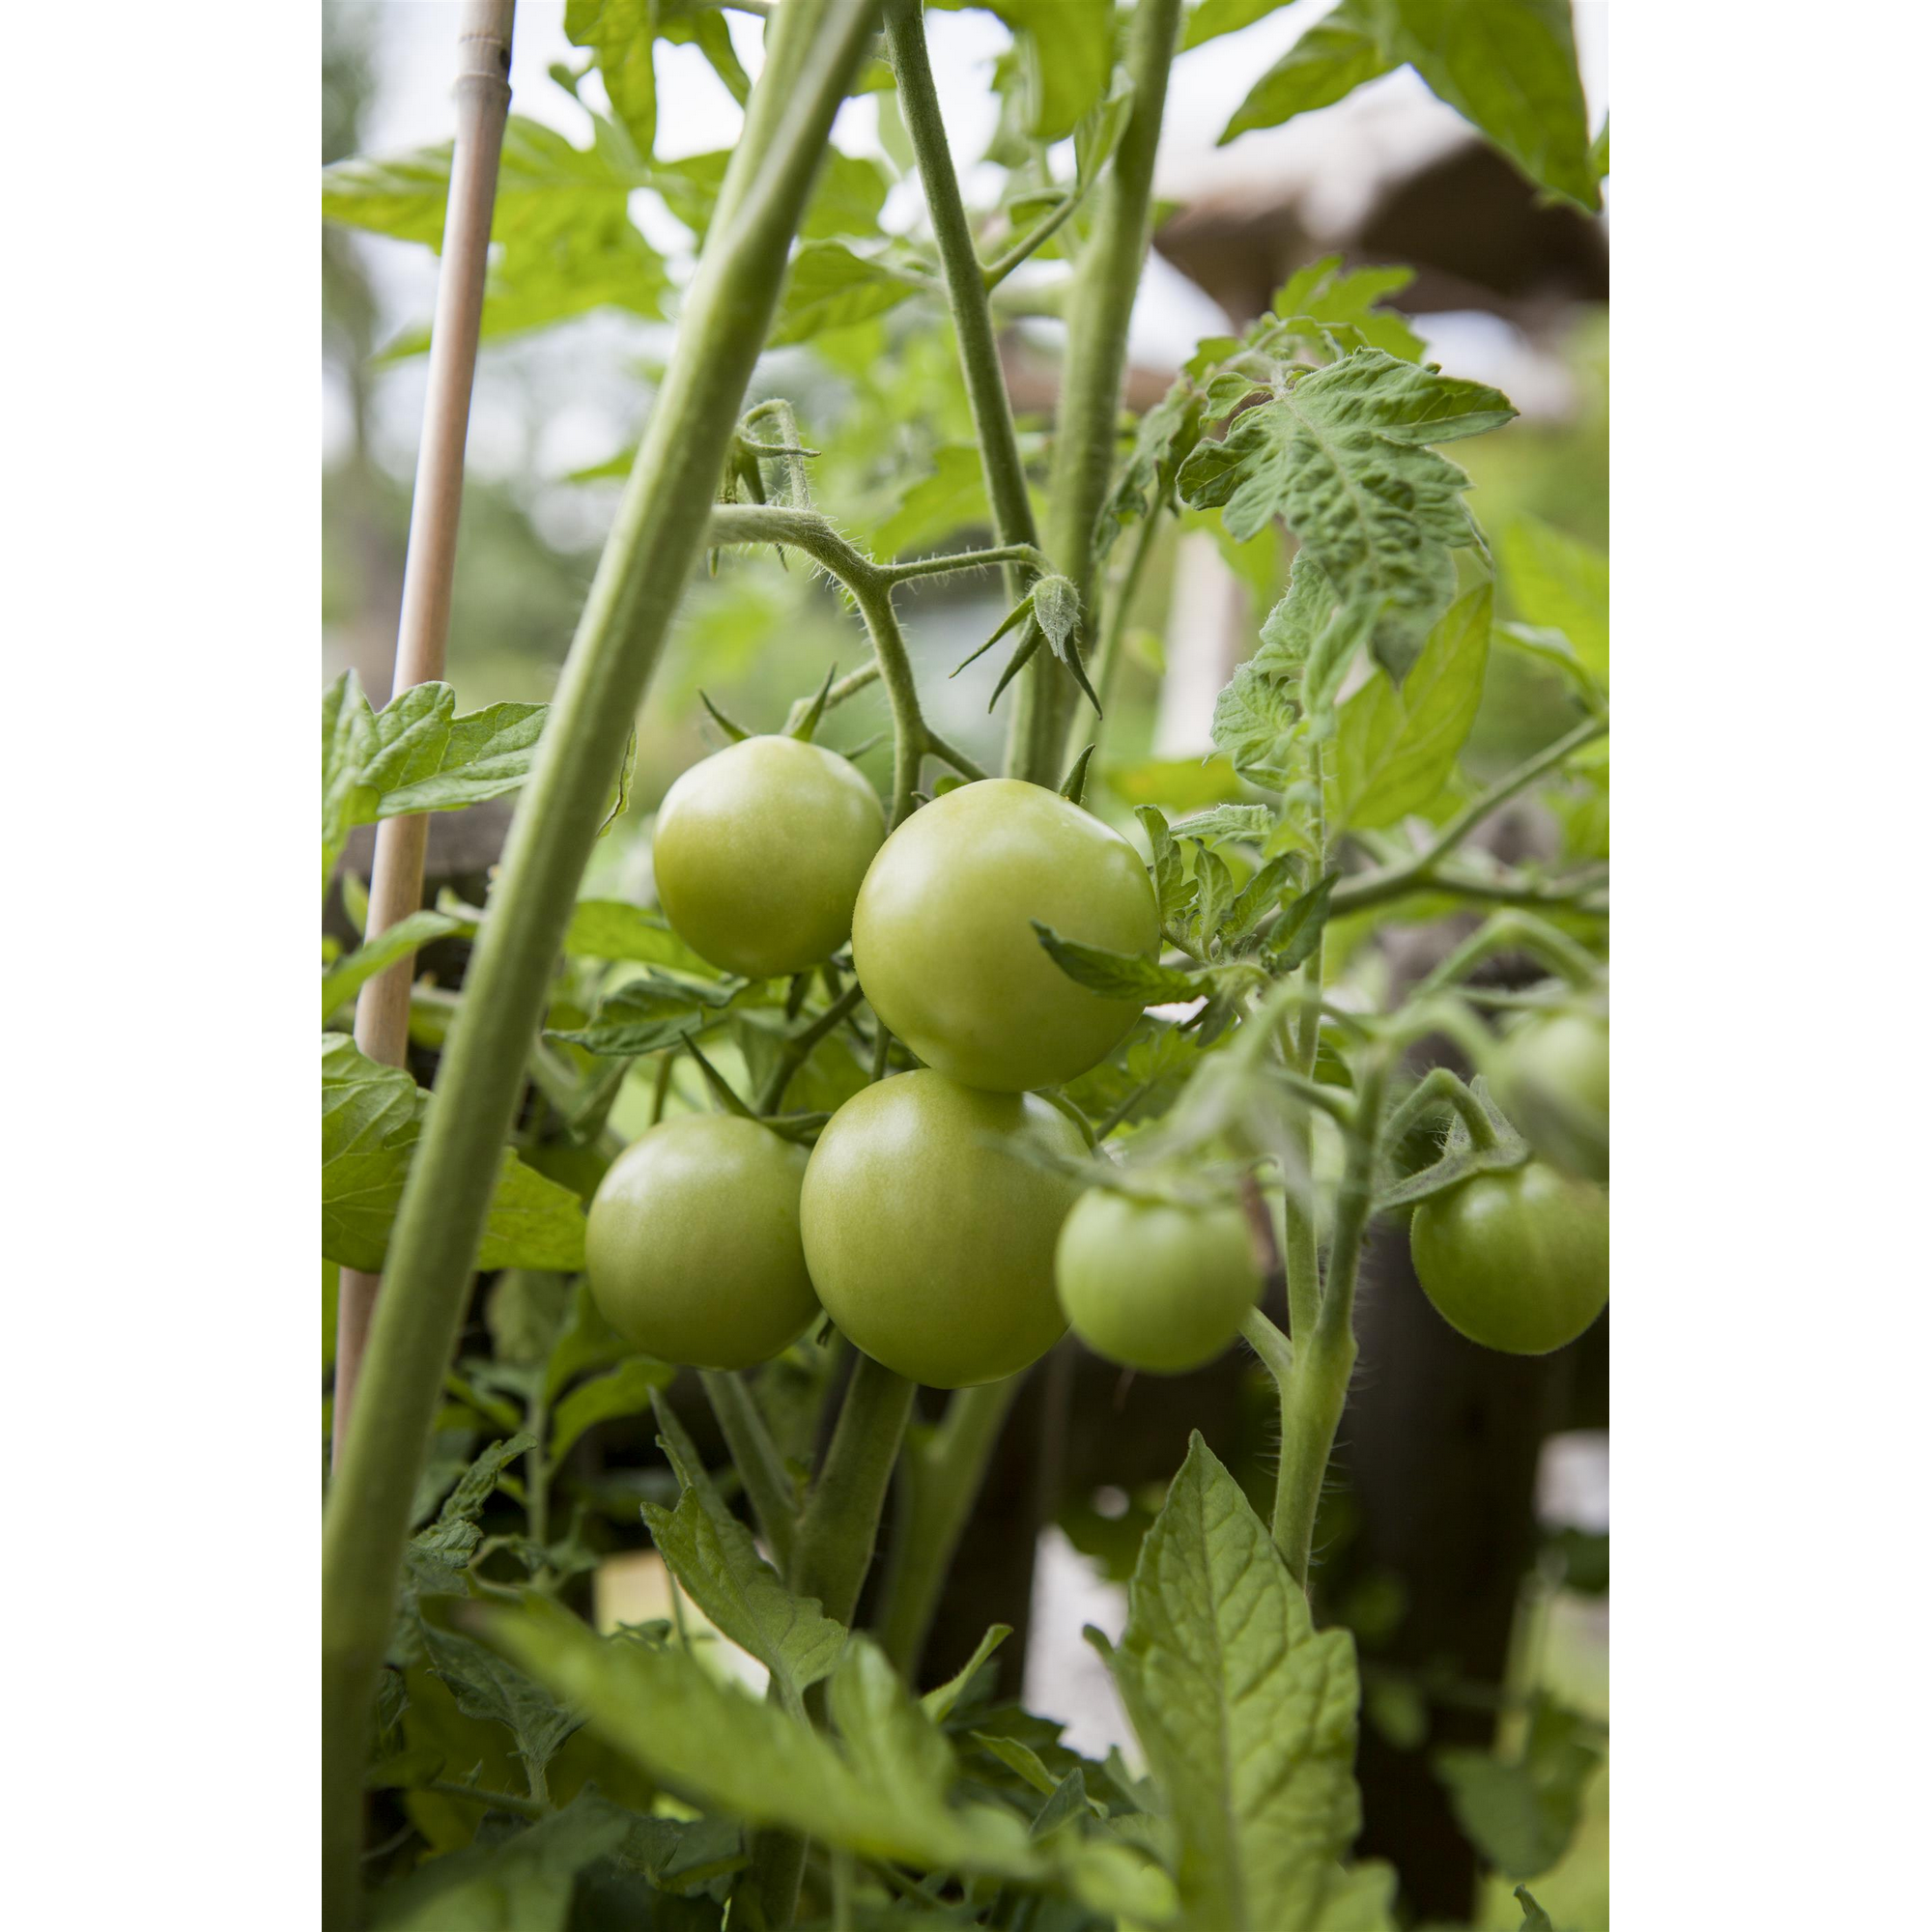 Zwerg-Tomate 'Primabell®' & 'Primagold®' 13 cm Topf, 2er-Set + product picture